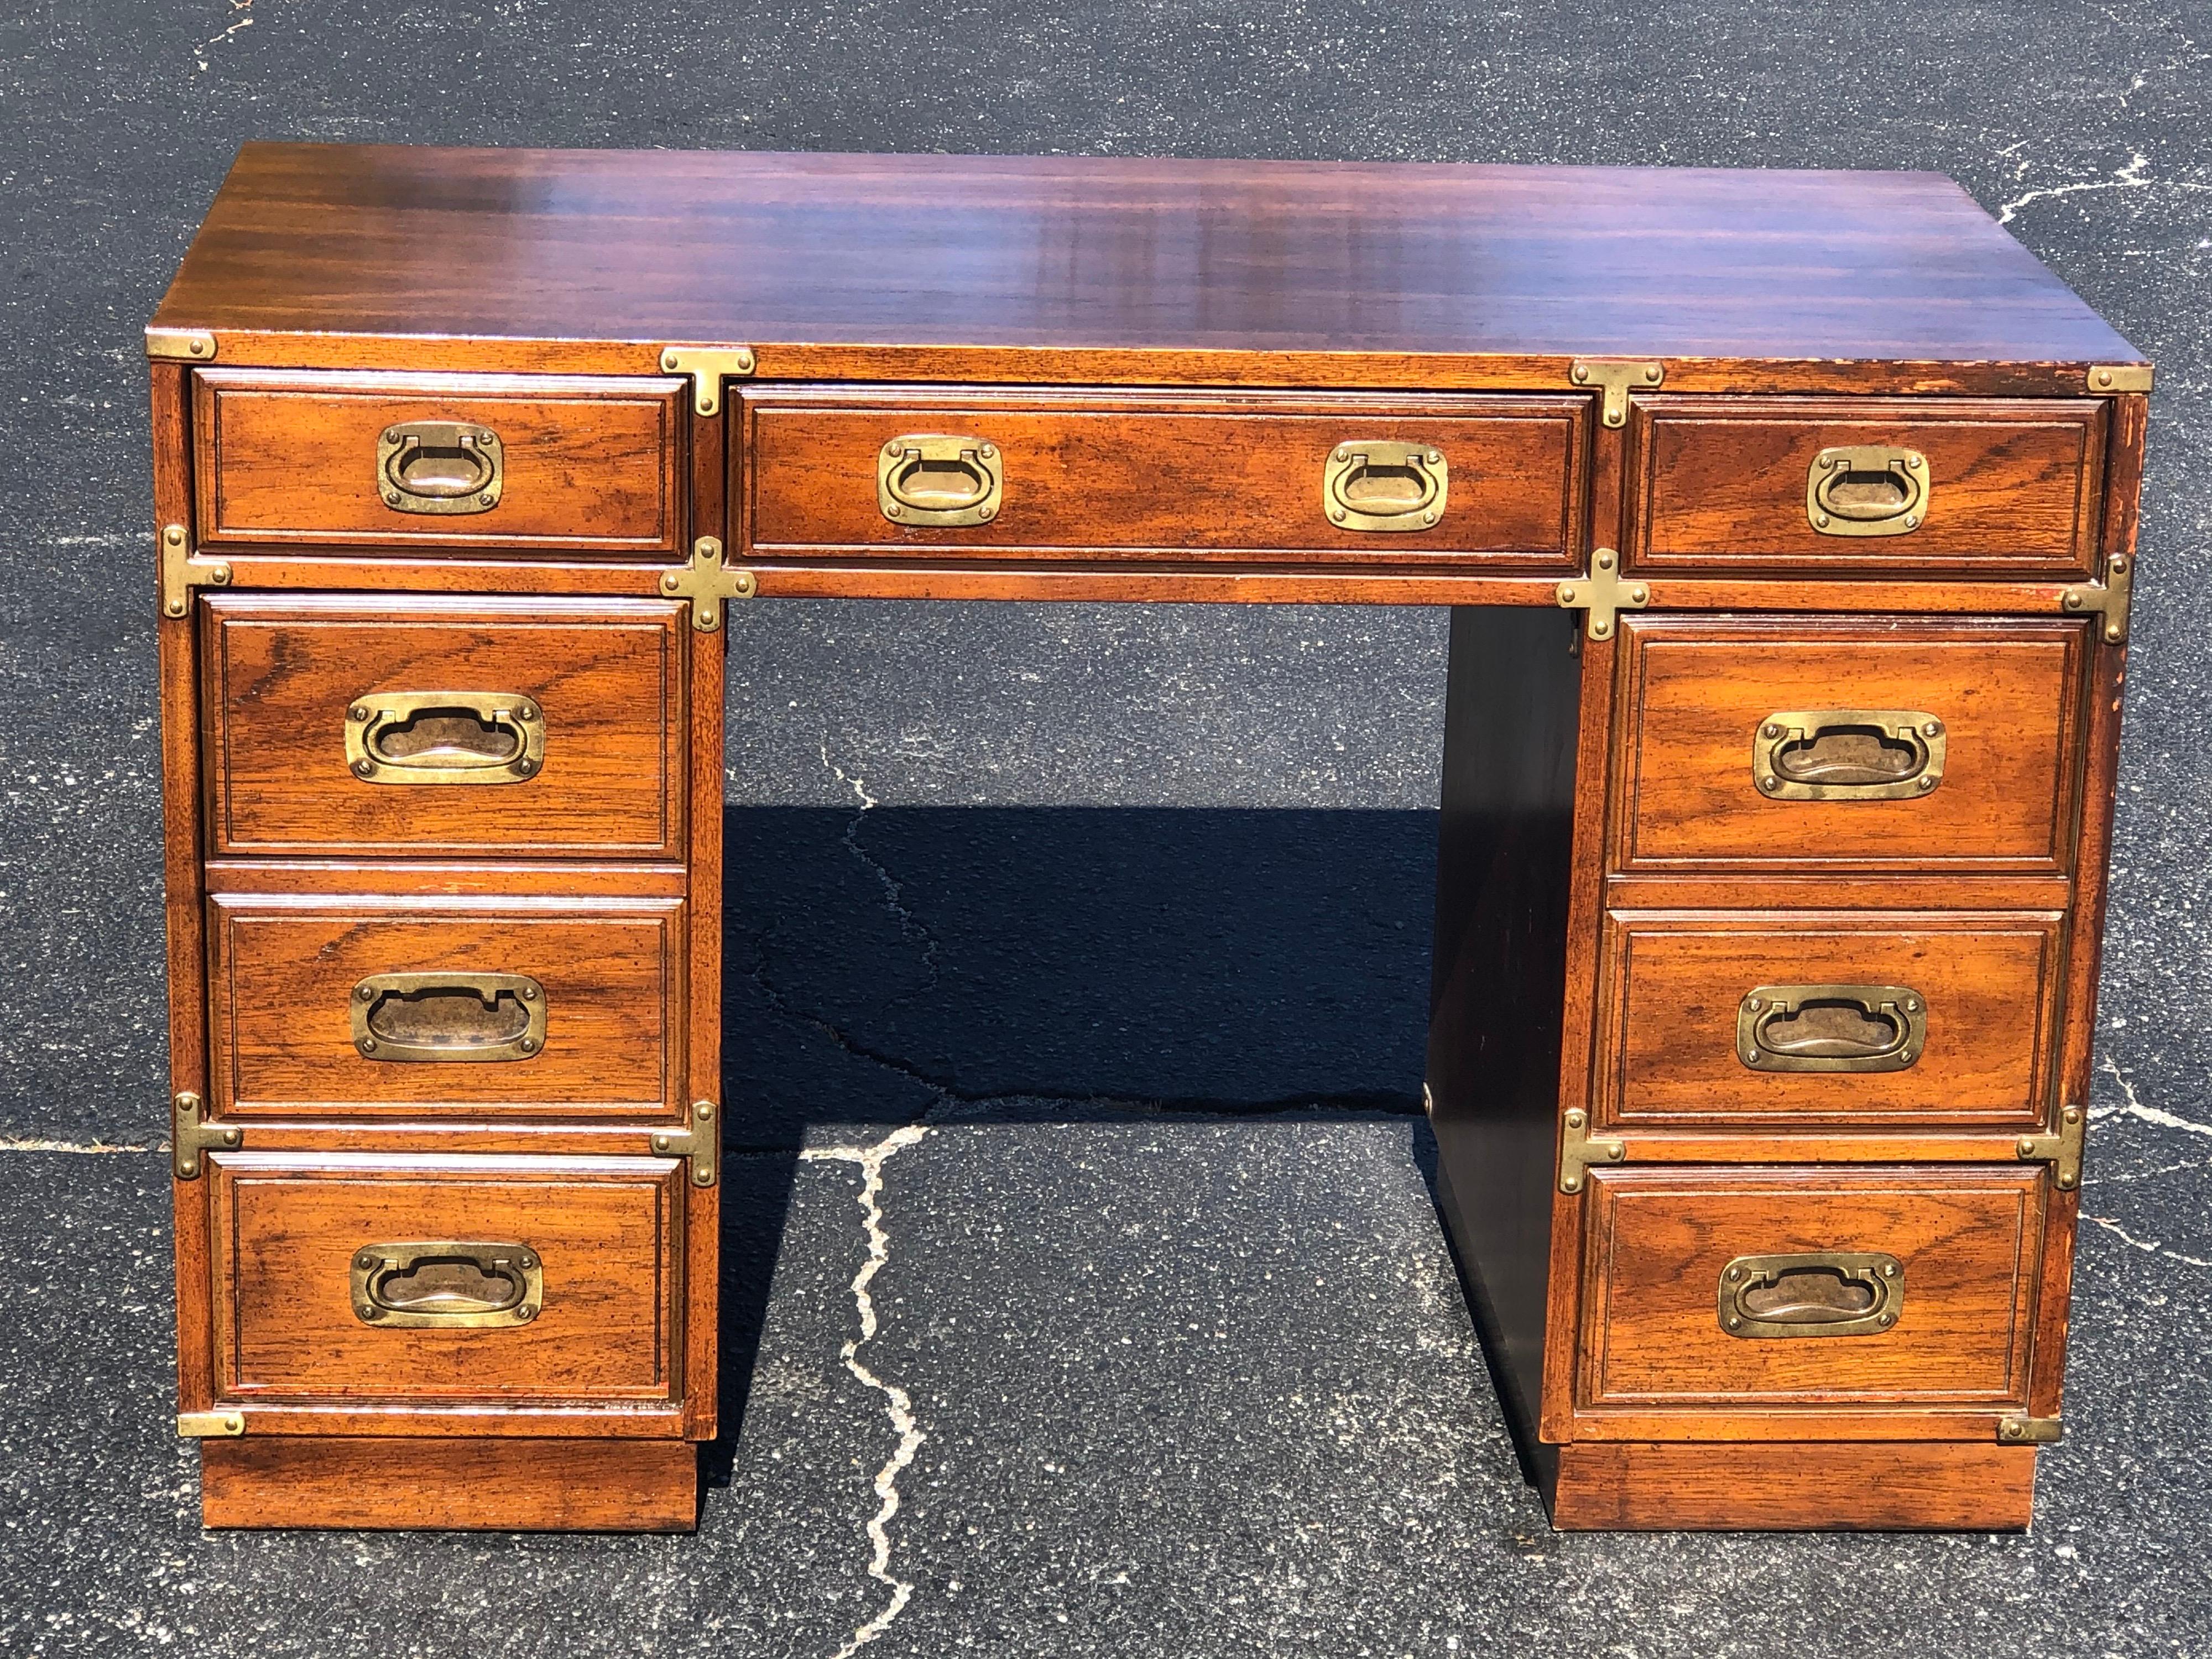 Vintage Drexel Campaign desk. Classic design and great storage. This would also look great painted in a bright color. Some discoloration on top from where a desk blotter blocked the sun. One handle pull is a bit lighter in brass tone as we have